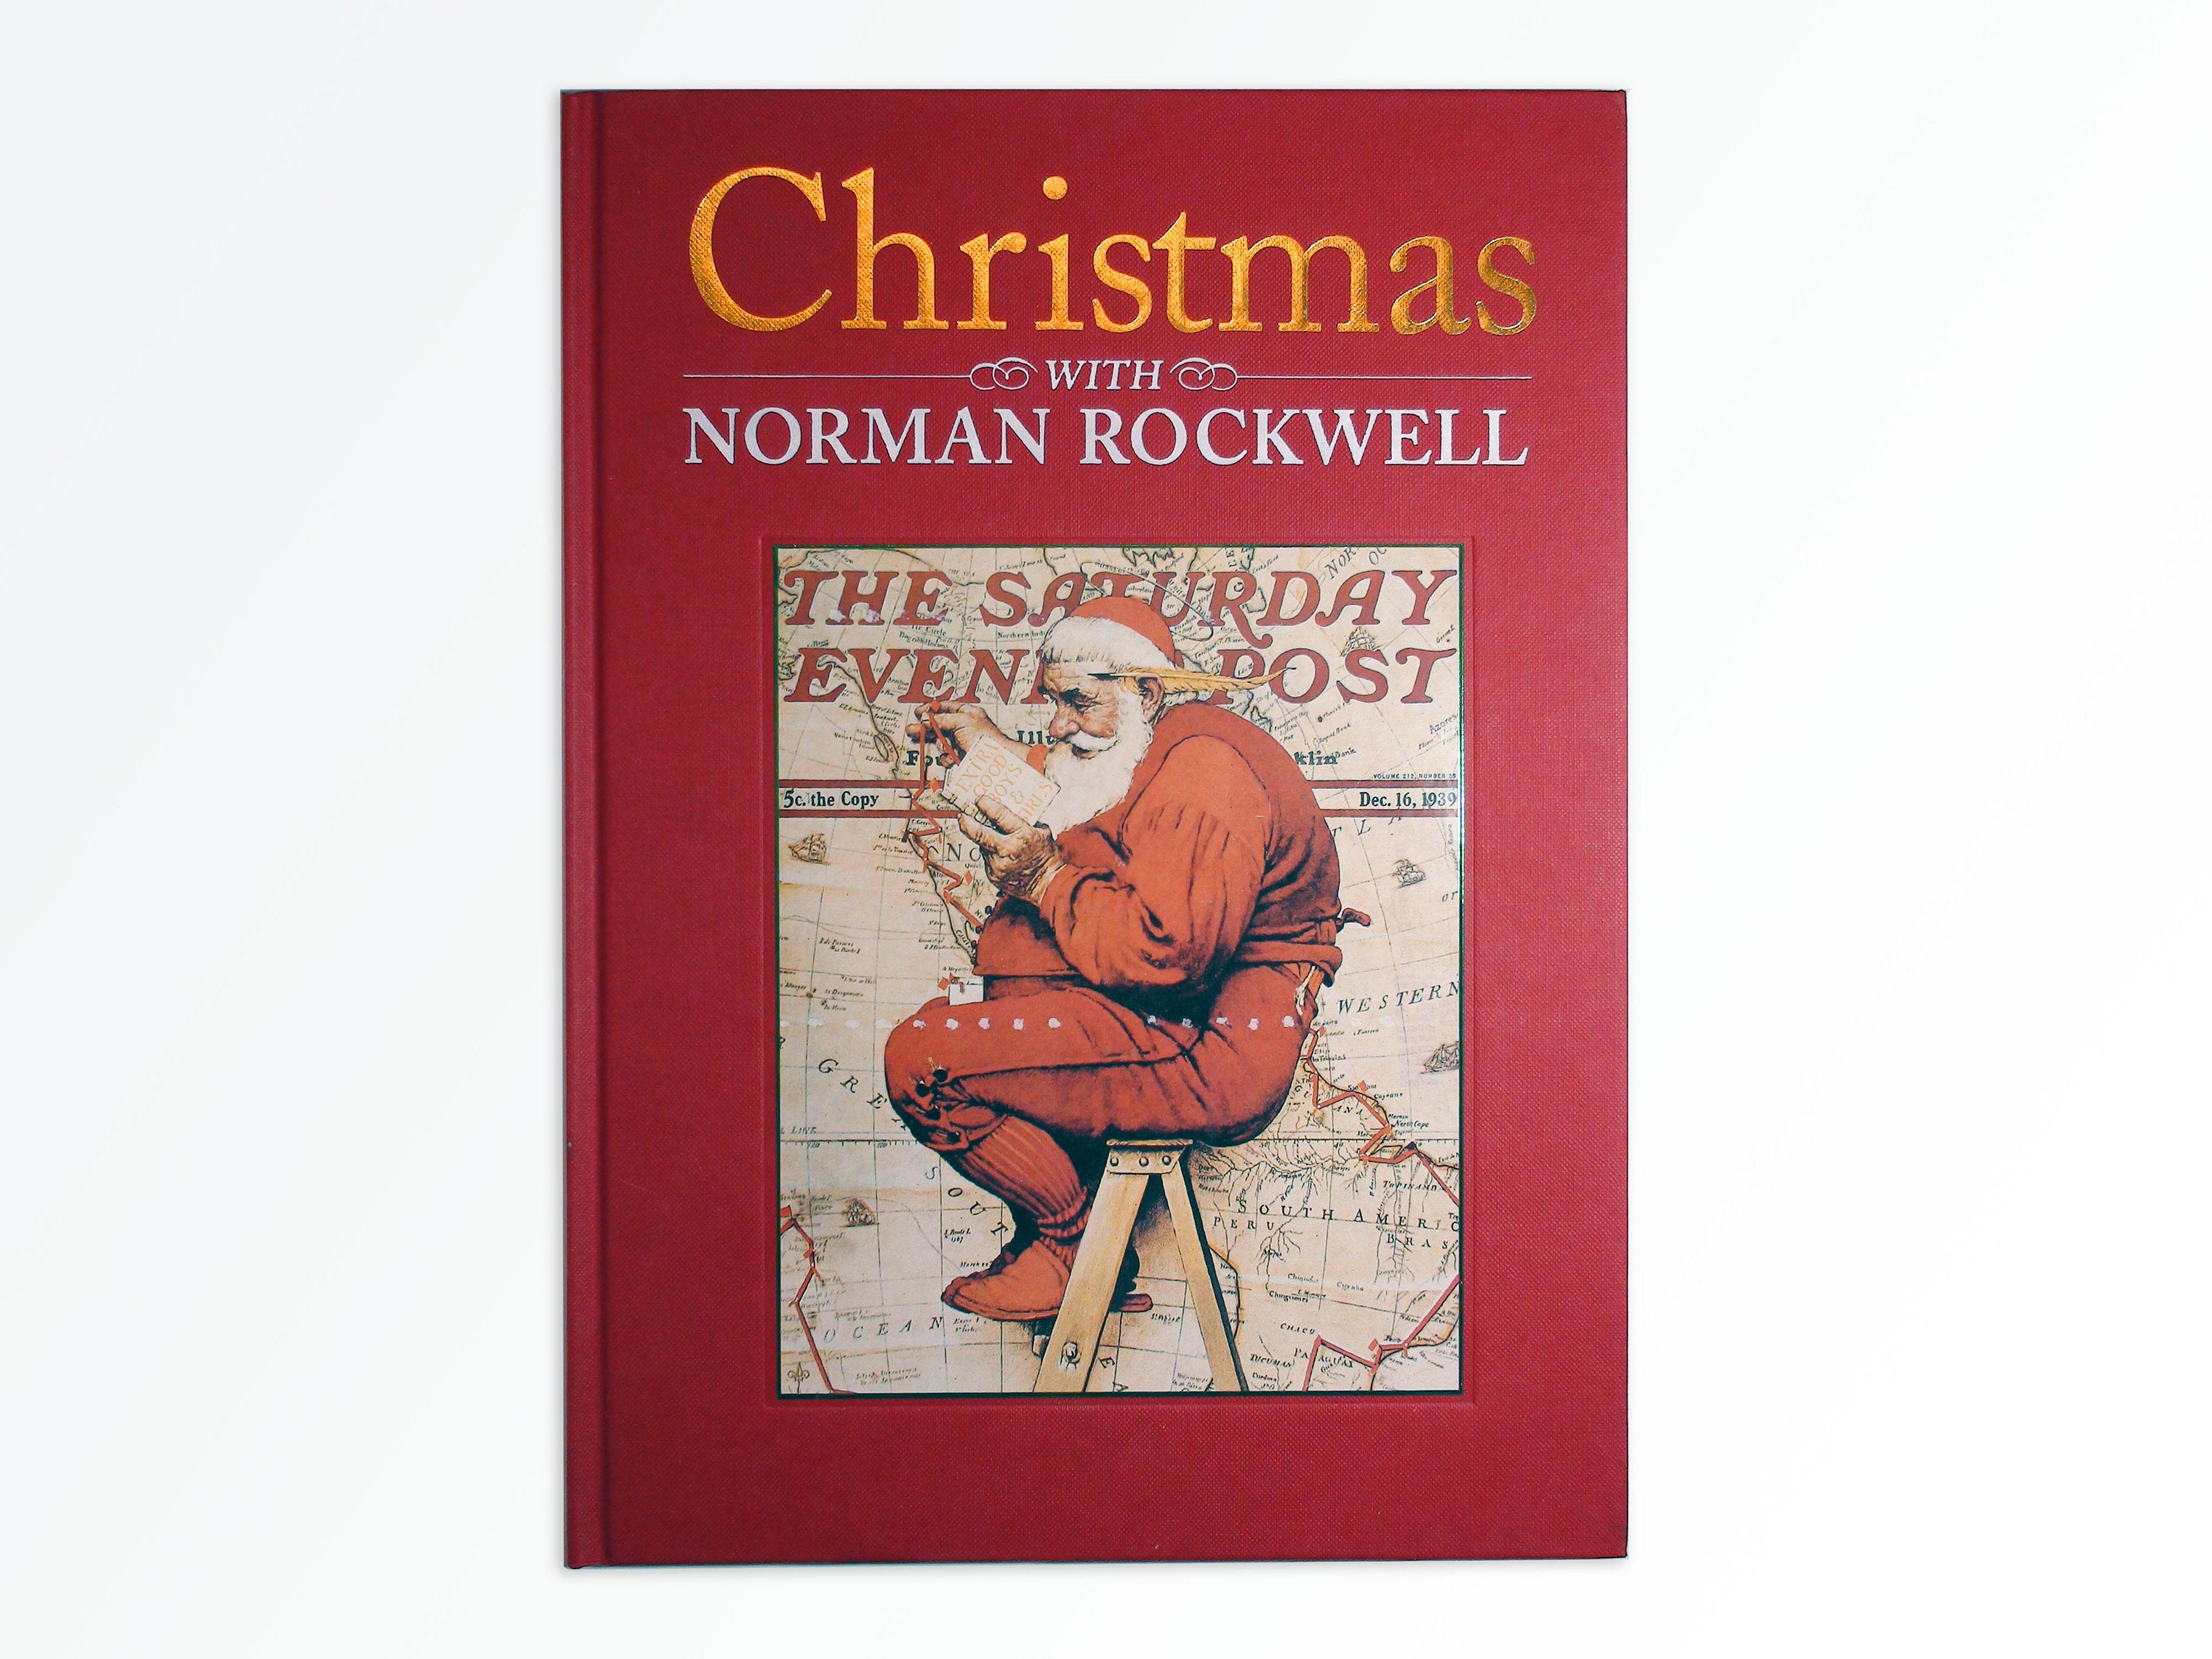 Christmas with Norman Rockwell, by John Kirk, Illustrated in Color, 1990